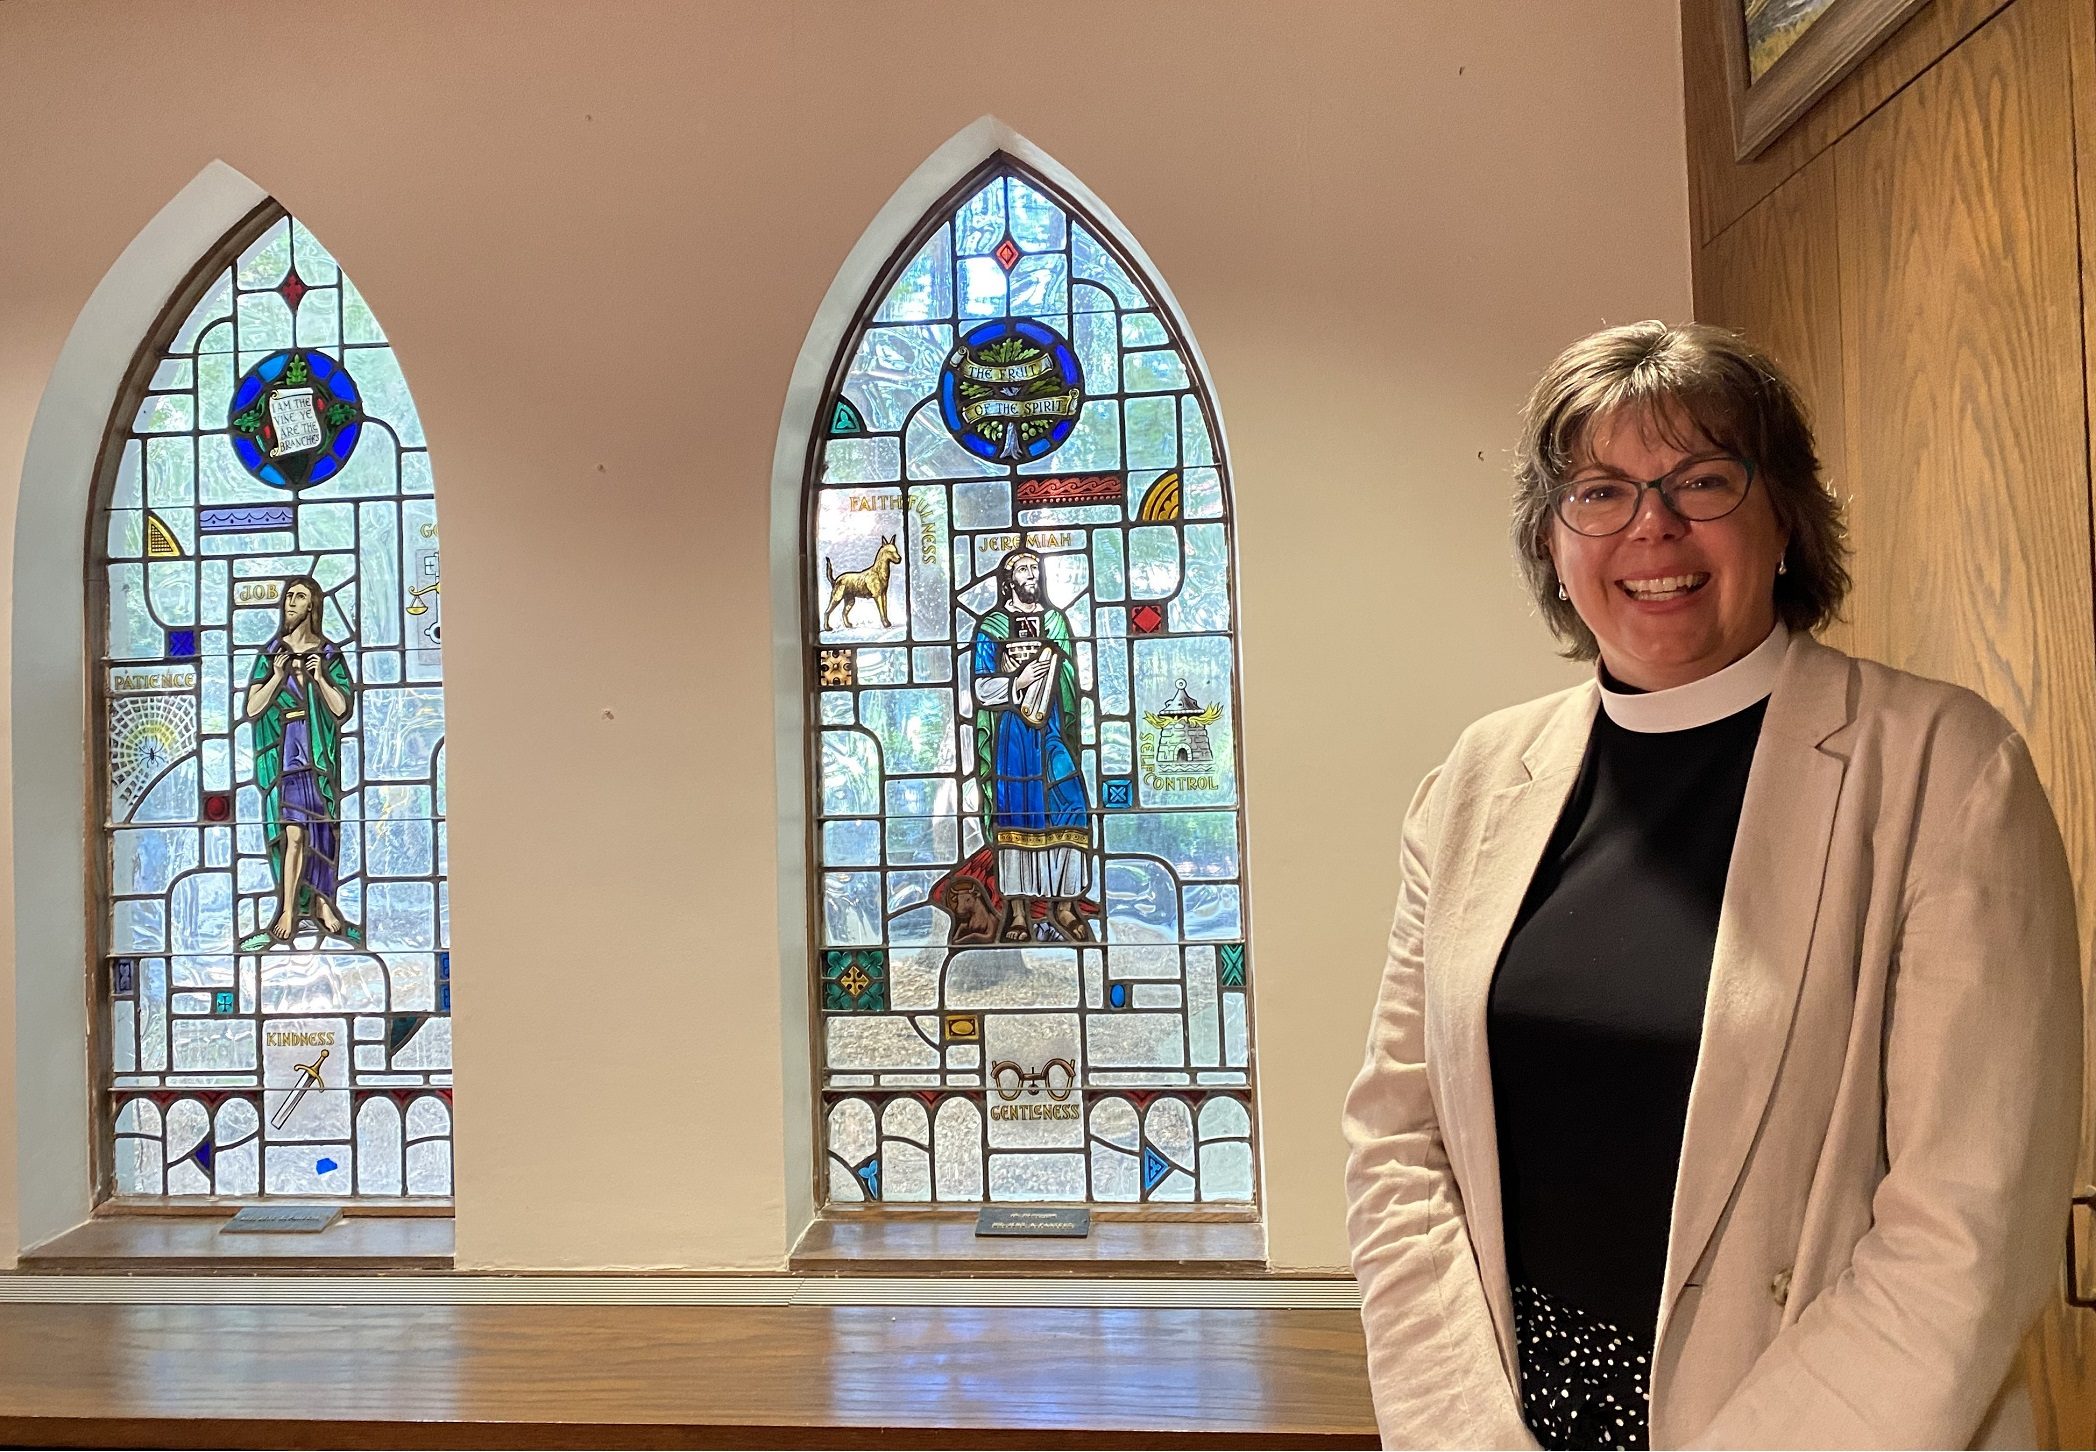 A color photograph of a white woman in a clerical collar and cream blazer standing on the right side of the image with 2 stained-glass windows, one on the left, one in the middle.